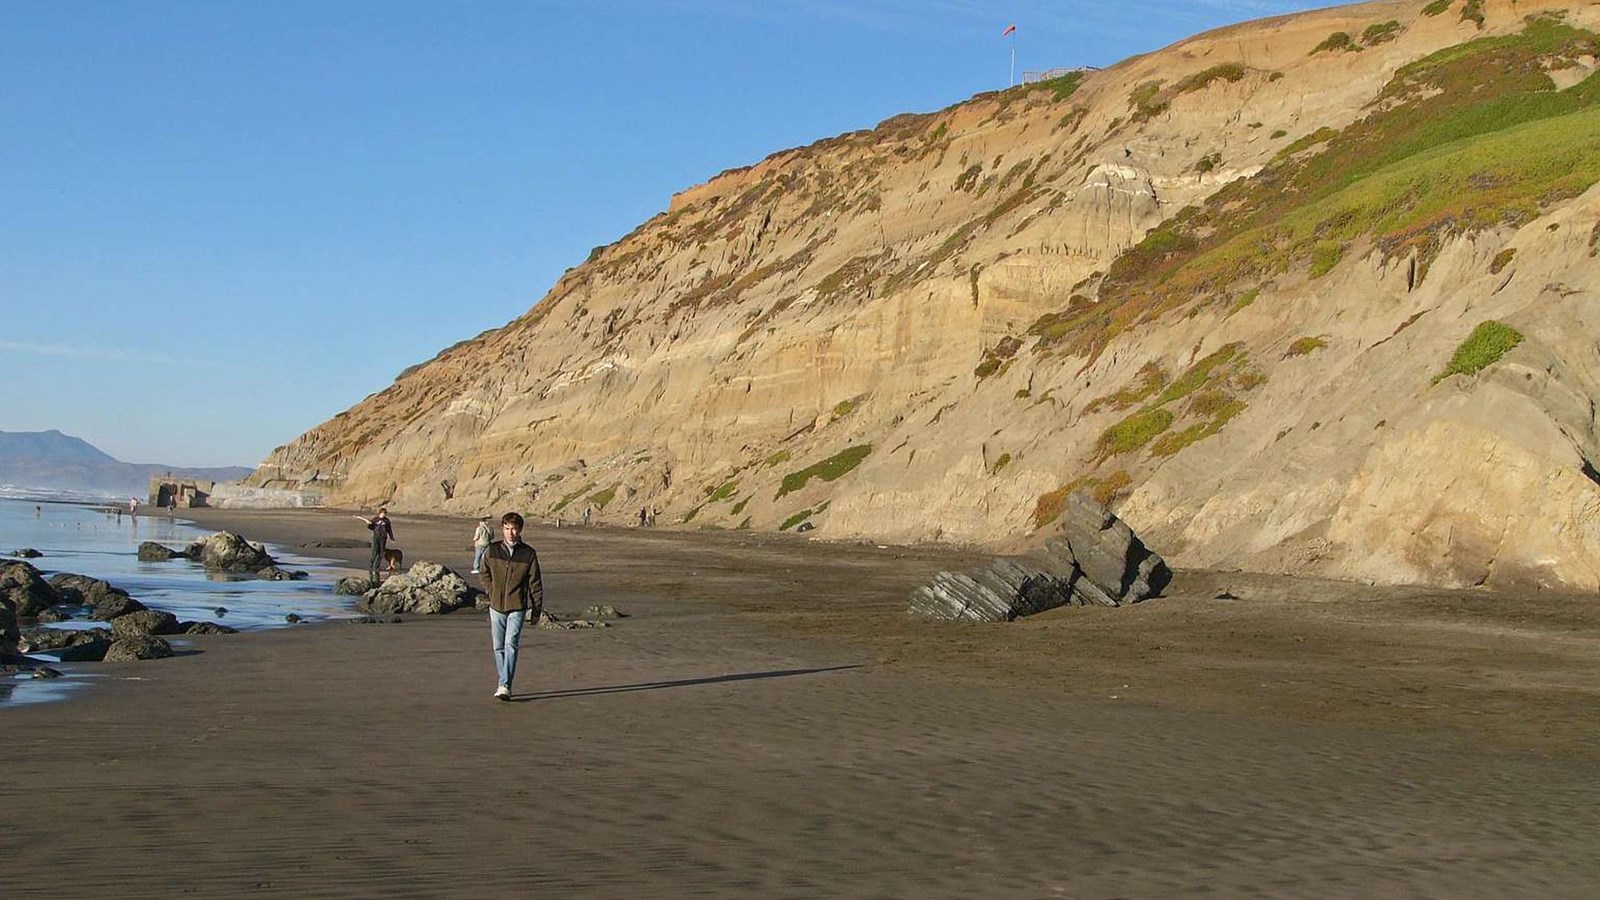 The tall, tan cliffs of Fort Funston with people walking along the seashore near their base.